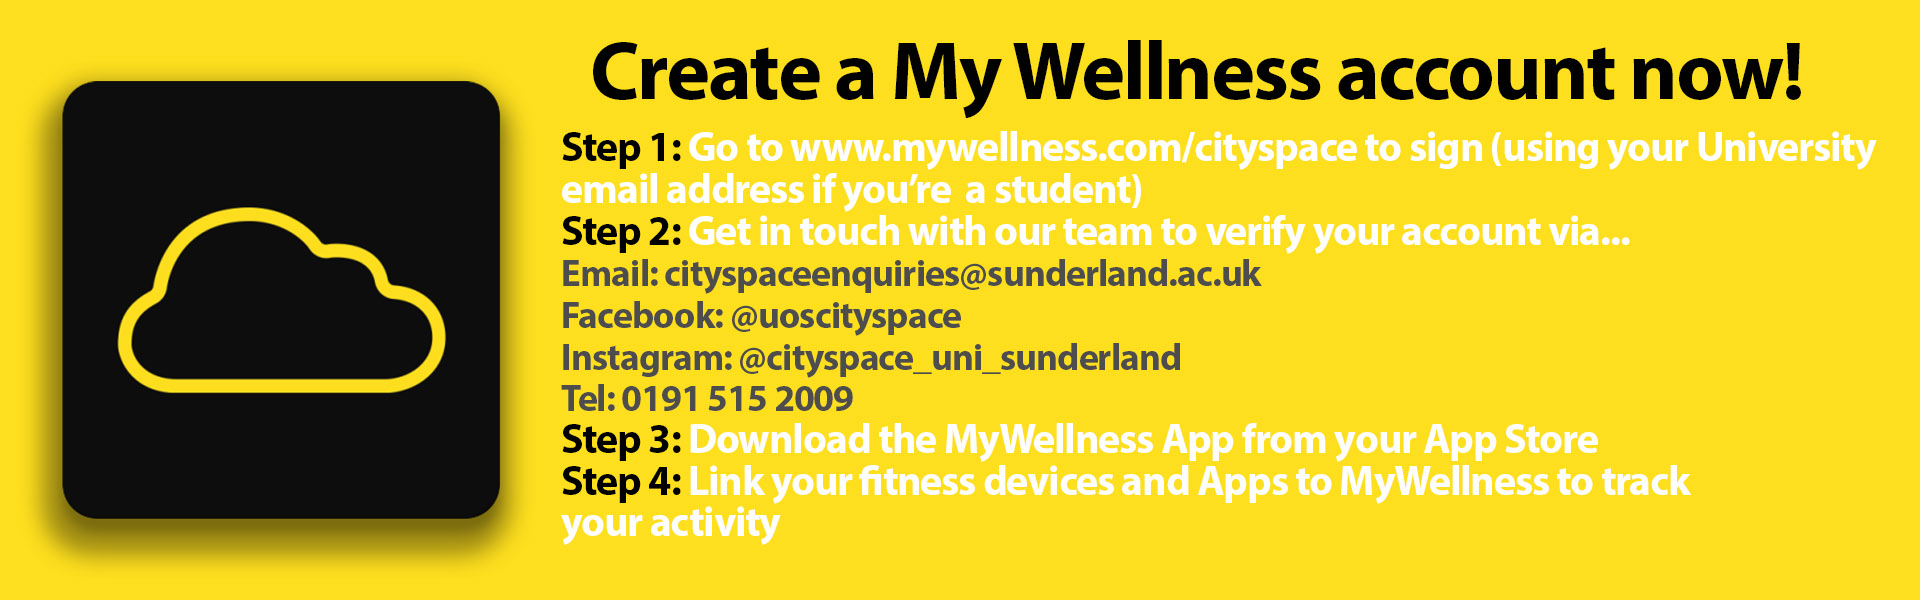 MyWellness sign up post